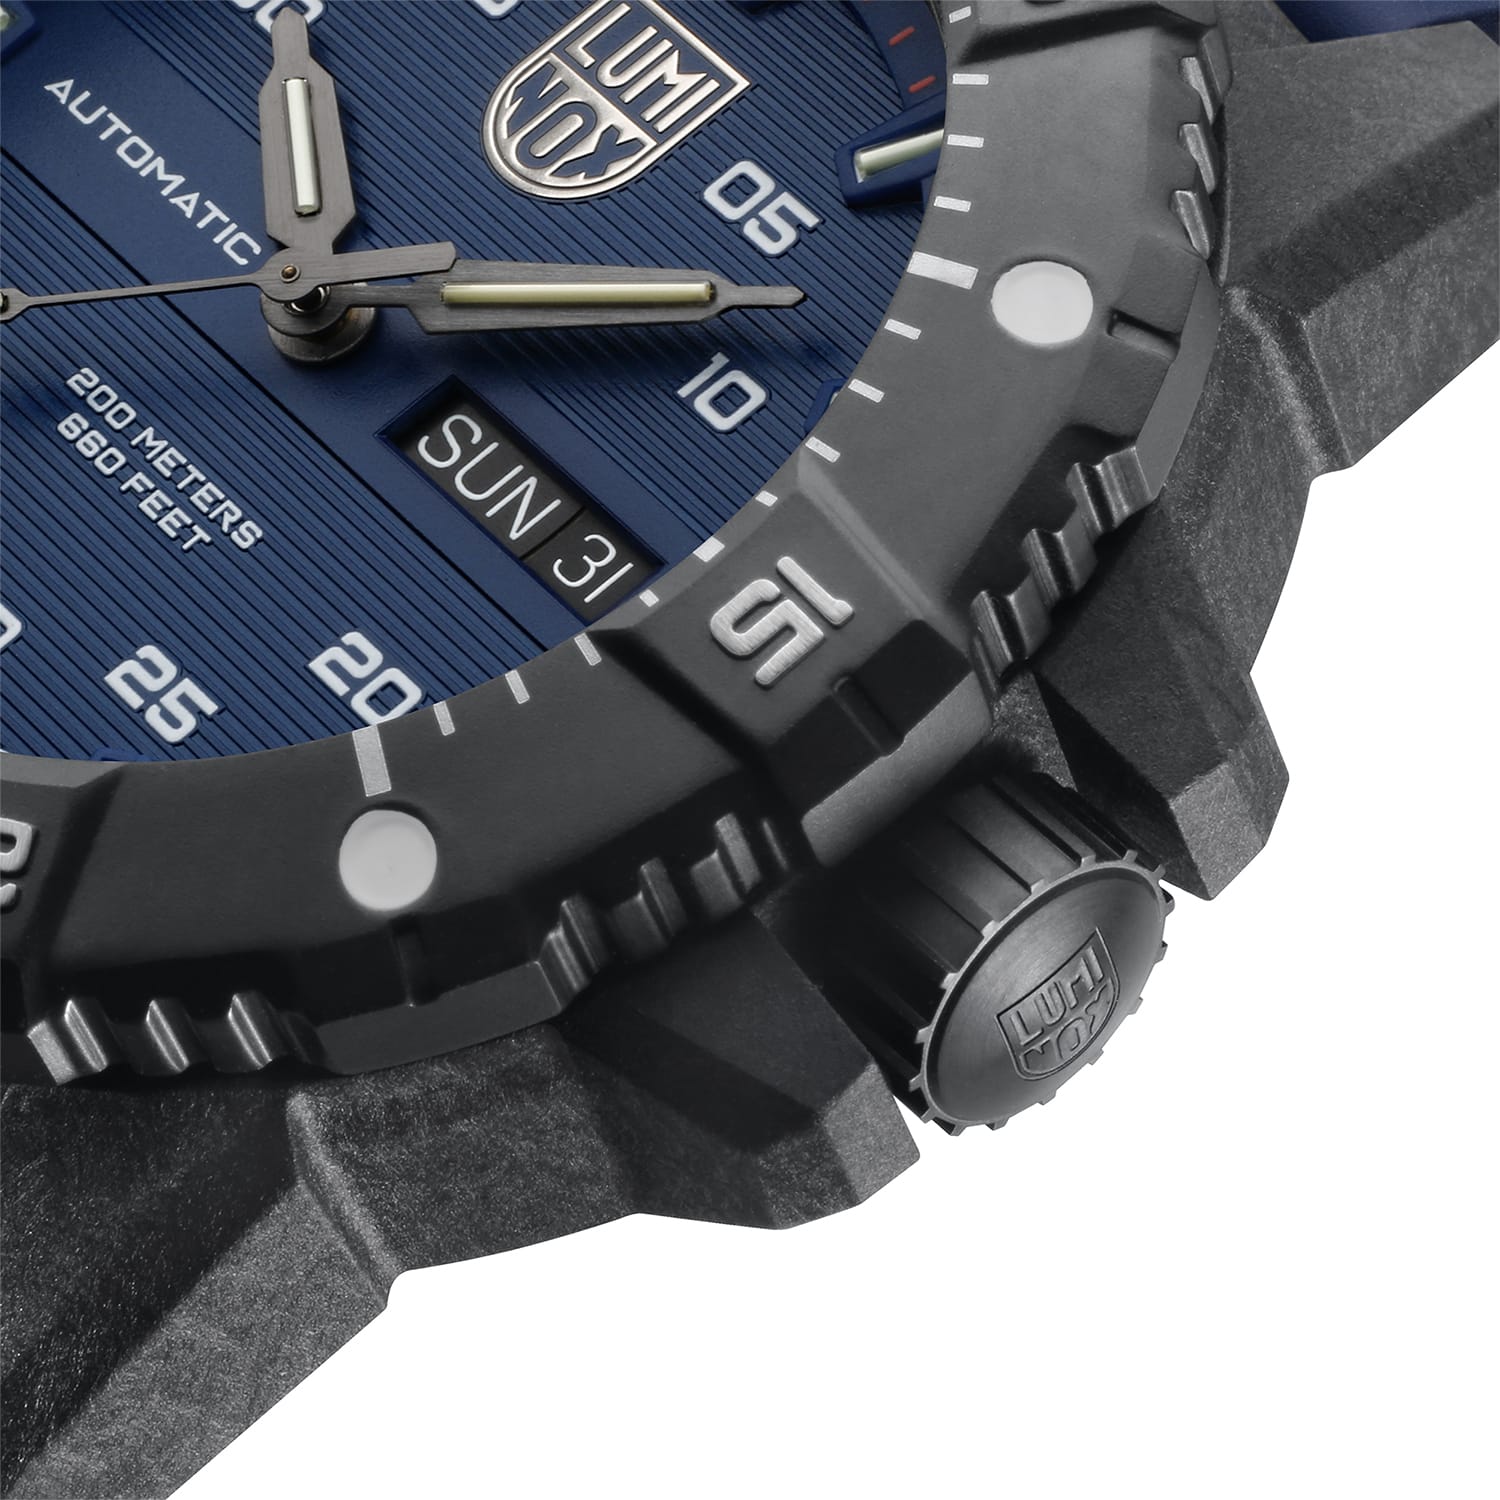 The Luminox Master Carbon SEAL Automatic 3860 Goes Automatic - Men's Folio